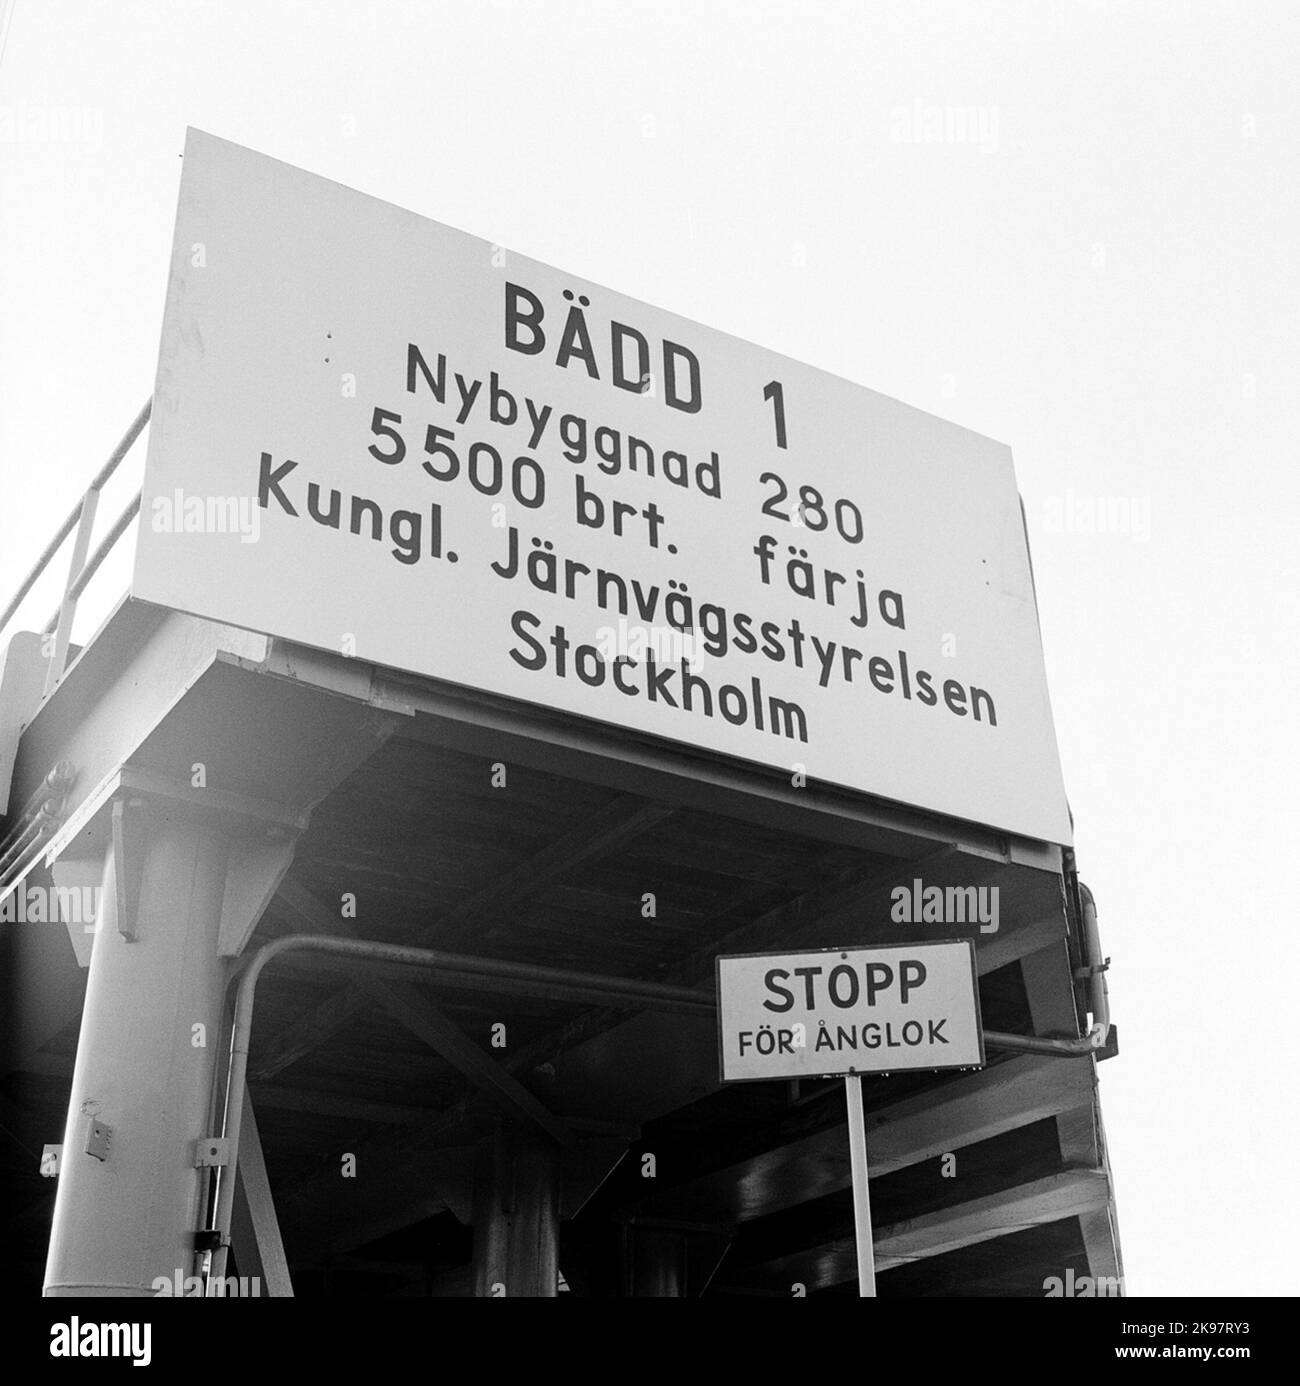 Bed 1 -new building 280 train ferry Skåne. New building at Uddevallavarvet. Train ferry ordered in 1965, for State Railways Stock Photo